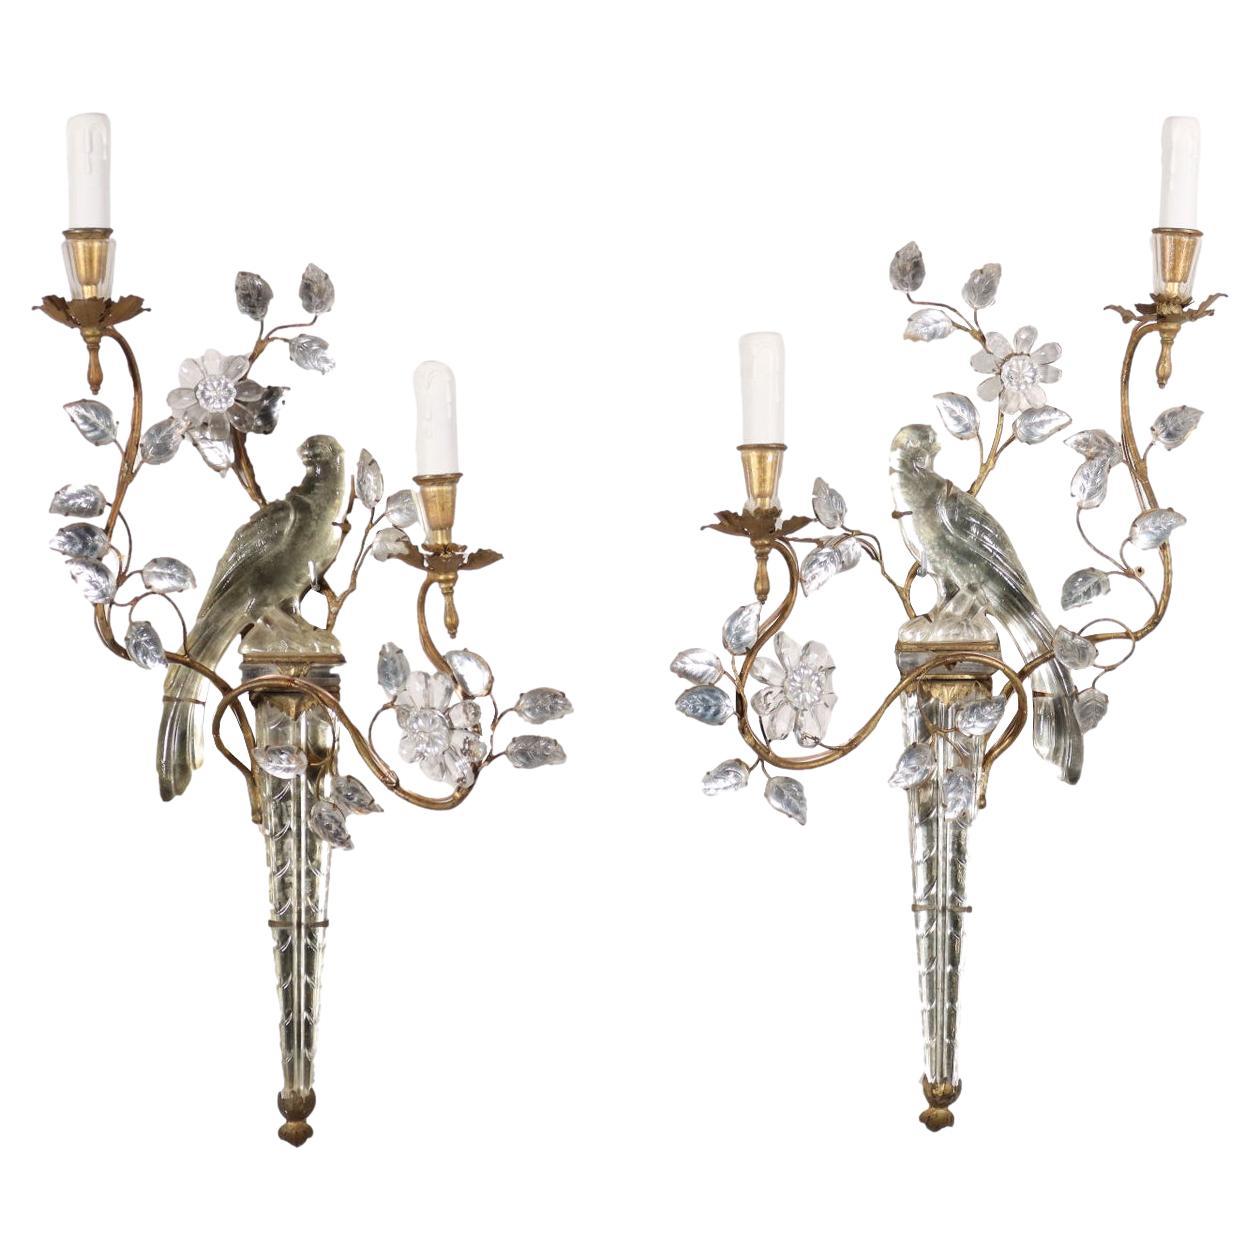 Pair of Maison Bagues Wall Lamps, 20th Century